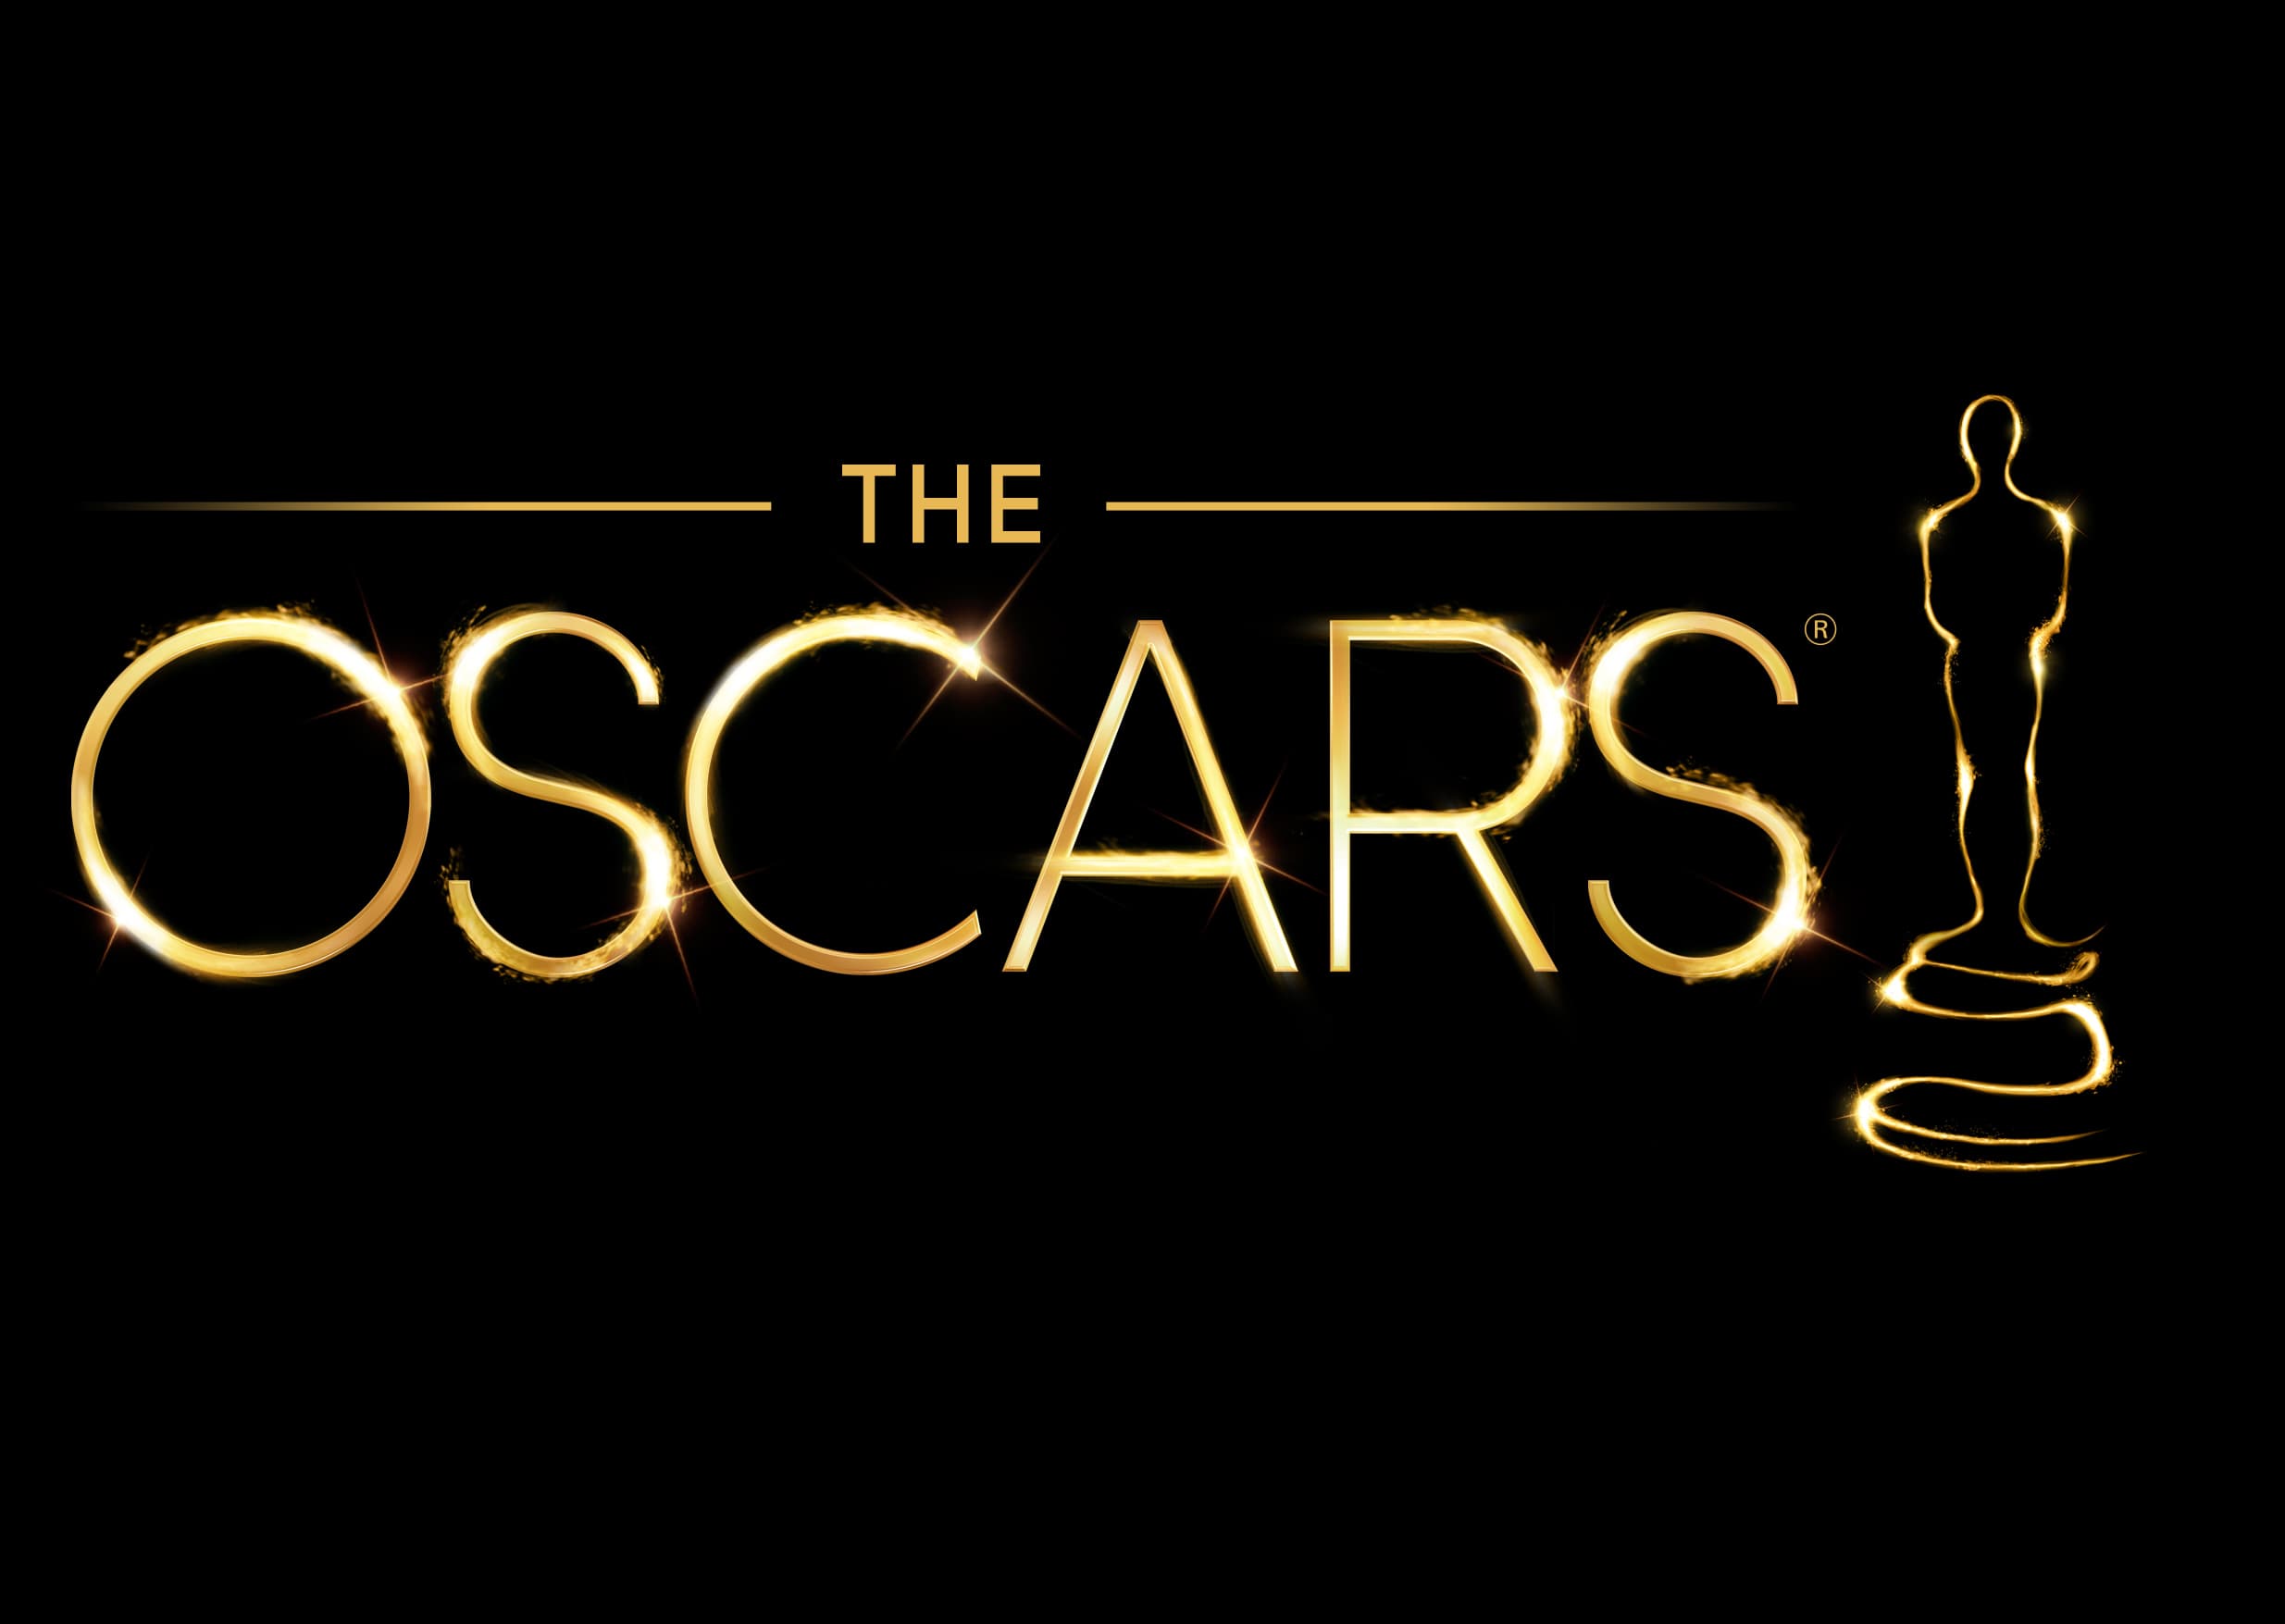 The 88th Academy Award nominations were announced Thursday morning at the Samuel Goldwyn Theater in Beverly Hills. WIT PR would like to extend congratulations and best wishes to the following nominees: BEST PICTURE Brooklyn, Producers: Finola Dwyer and Amanda Posey The Revenant, Producers: Arnon Milchan, Steve Golin, Alejandro G. Inarritu, Mary Parent and Keith Redmon Room, Producer: Ed…